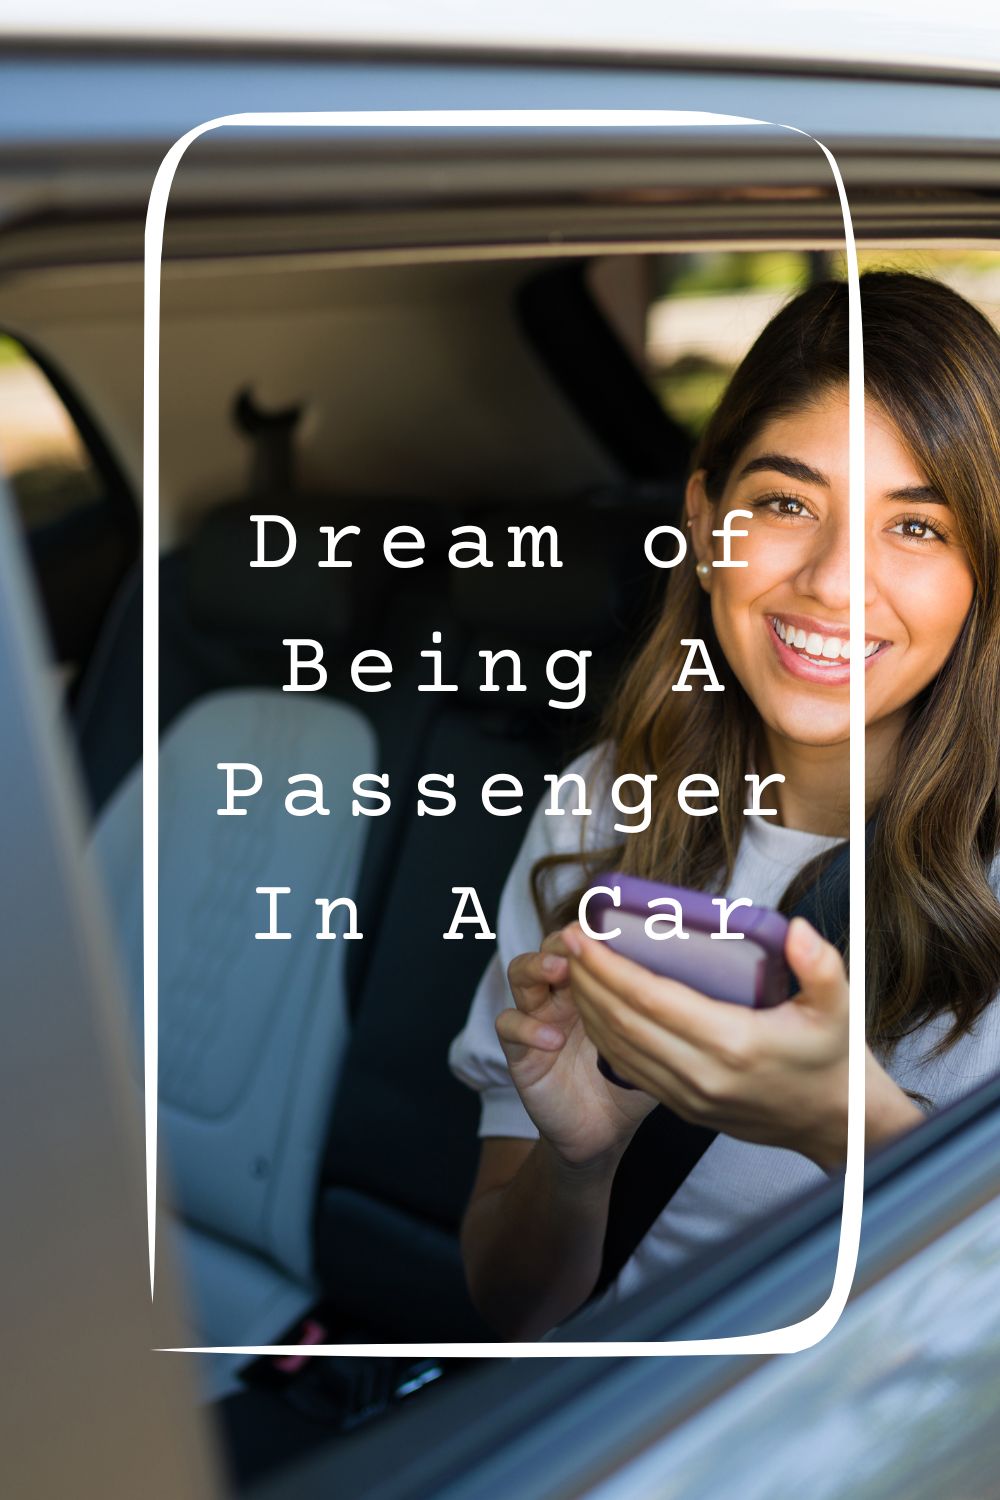 11 Dream of Being A Passenger In A Car Meanings4